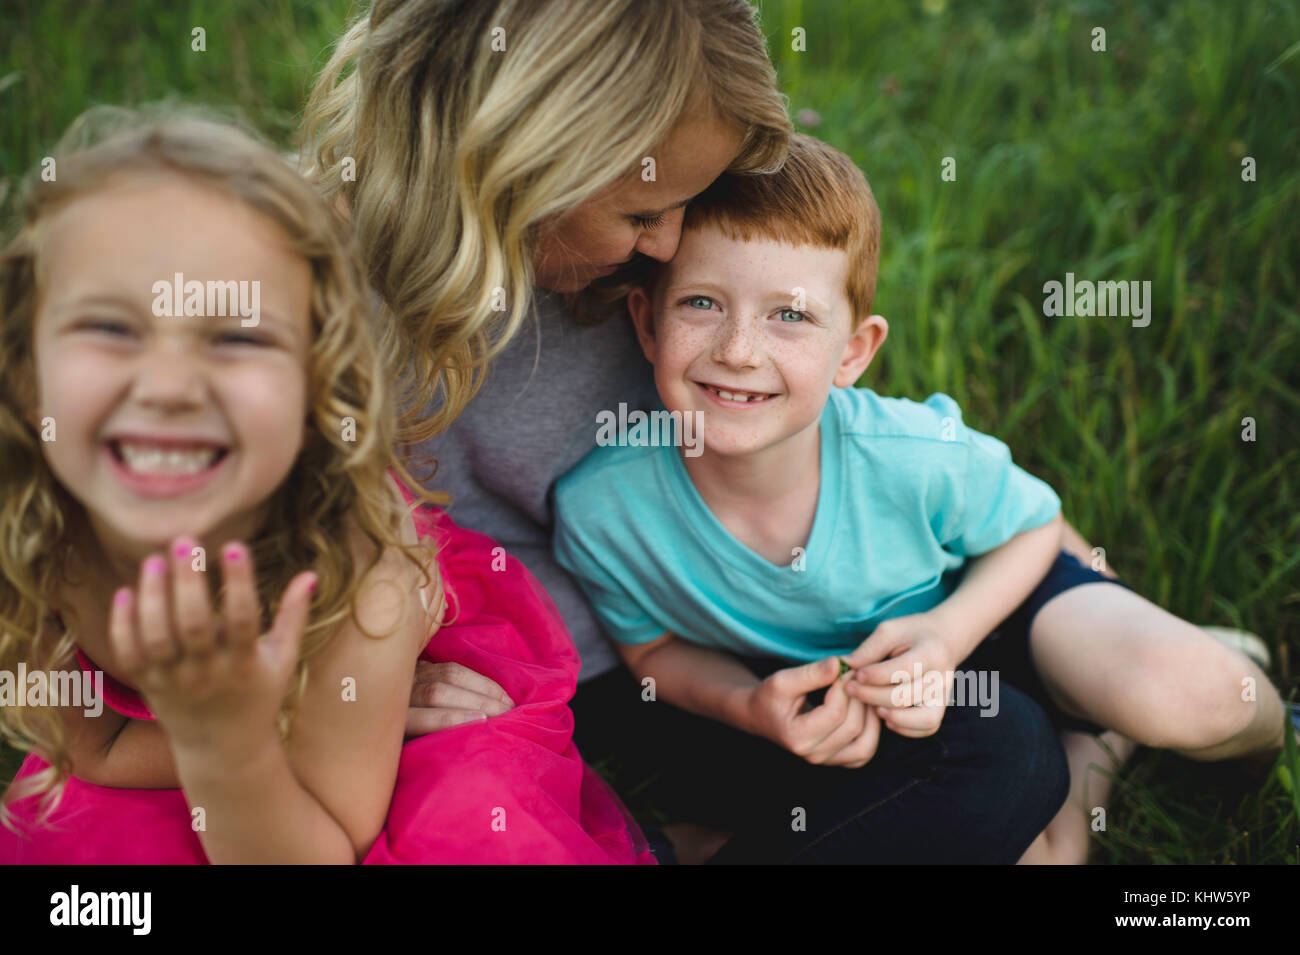 Portrait of girl and brother sitting on mothers lap in grass Stock Photo